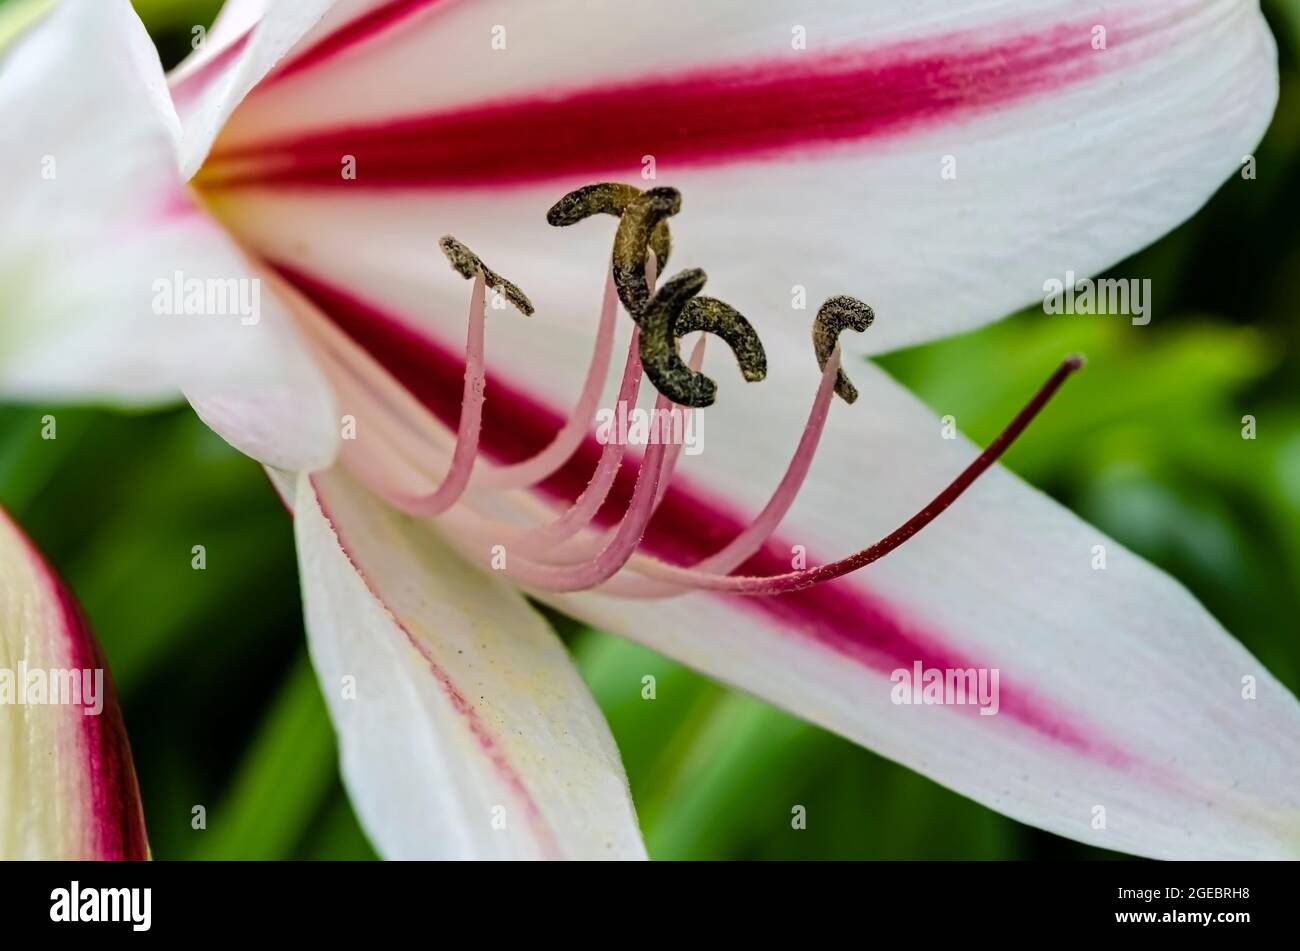 The filament of the Crinum latifolium grows long and turns upward with banana shaped anther at its end.. The petals are white with wine-red streeks ru Stock Photo